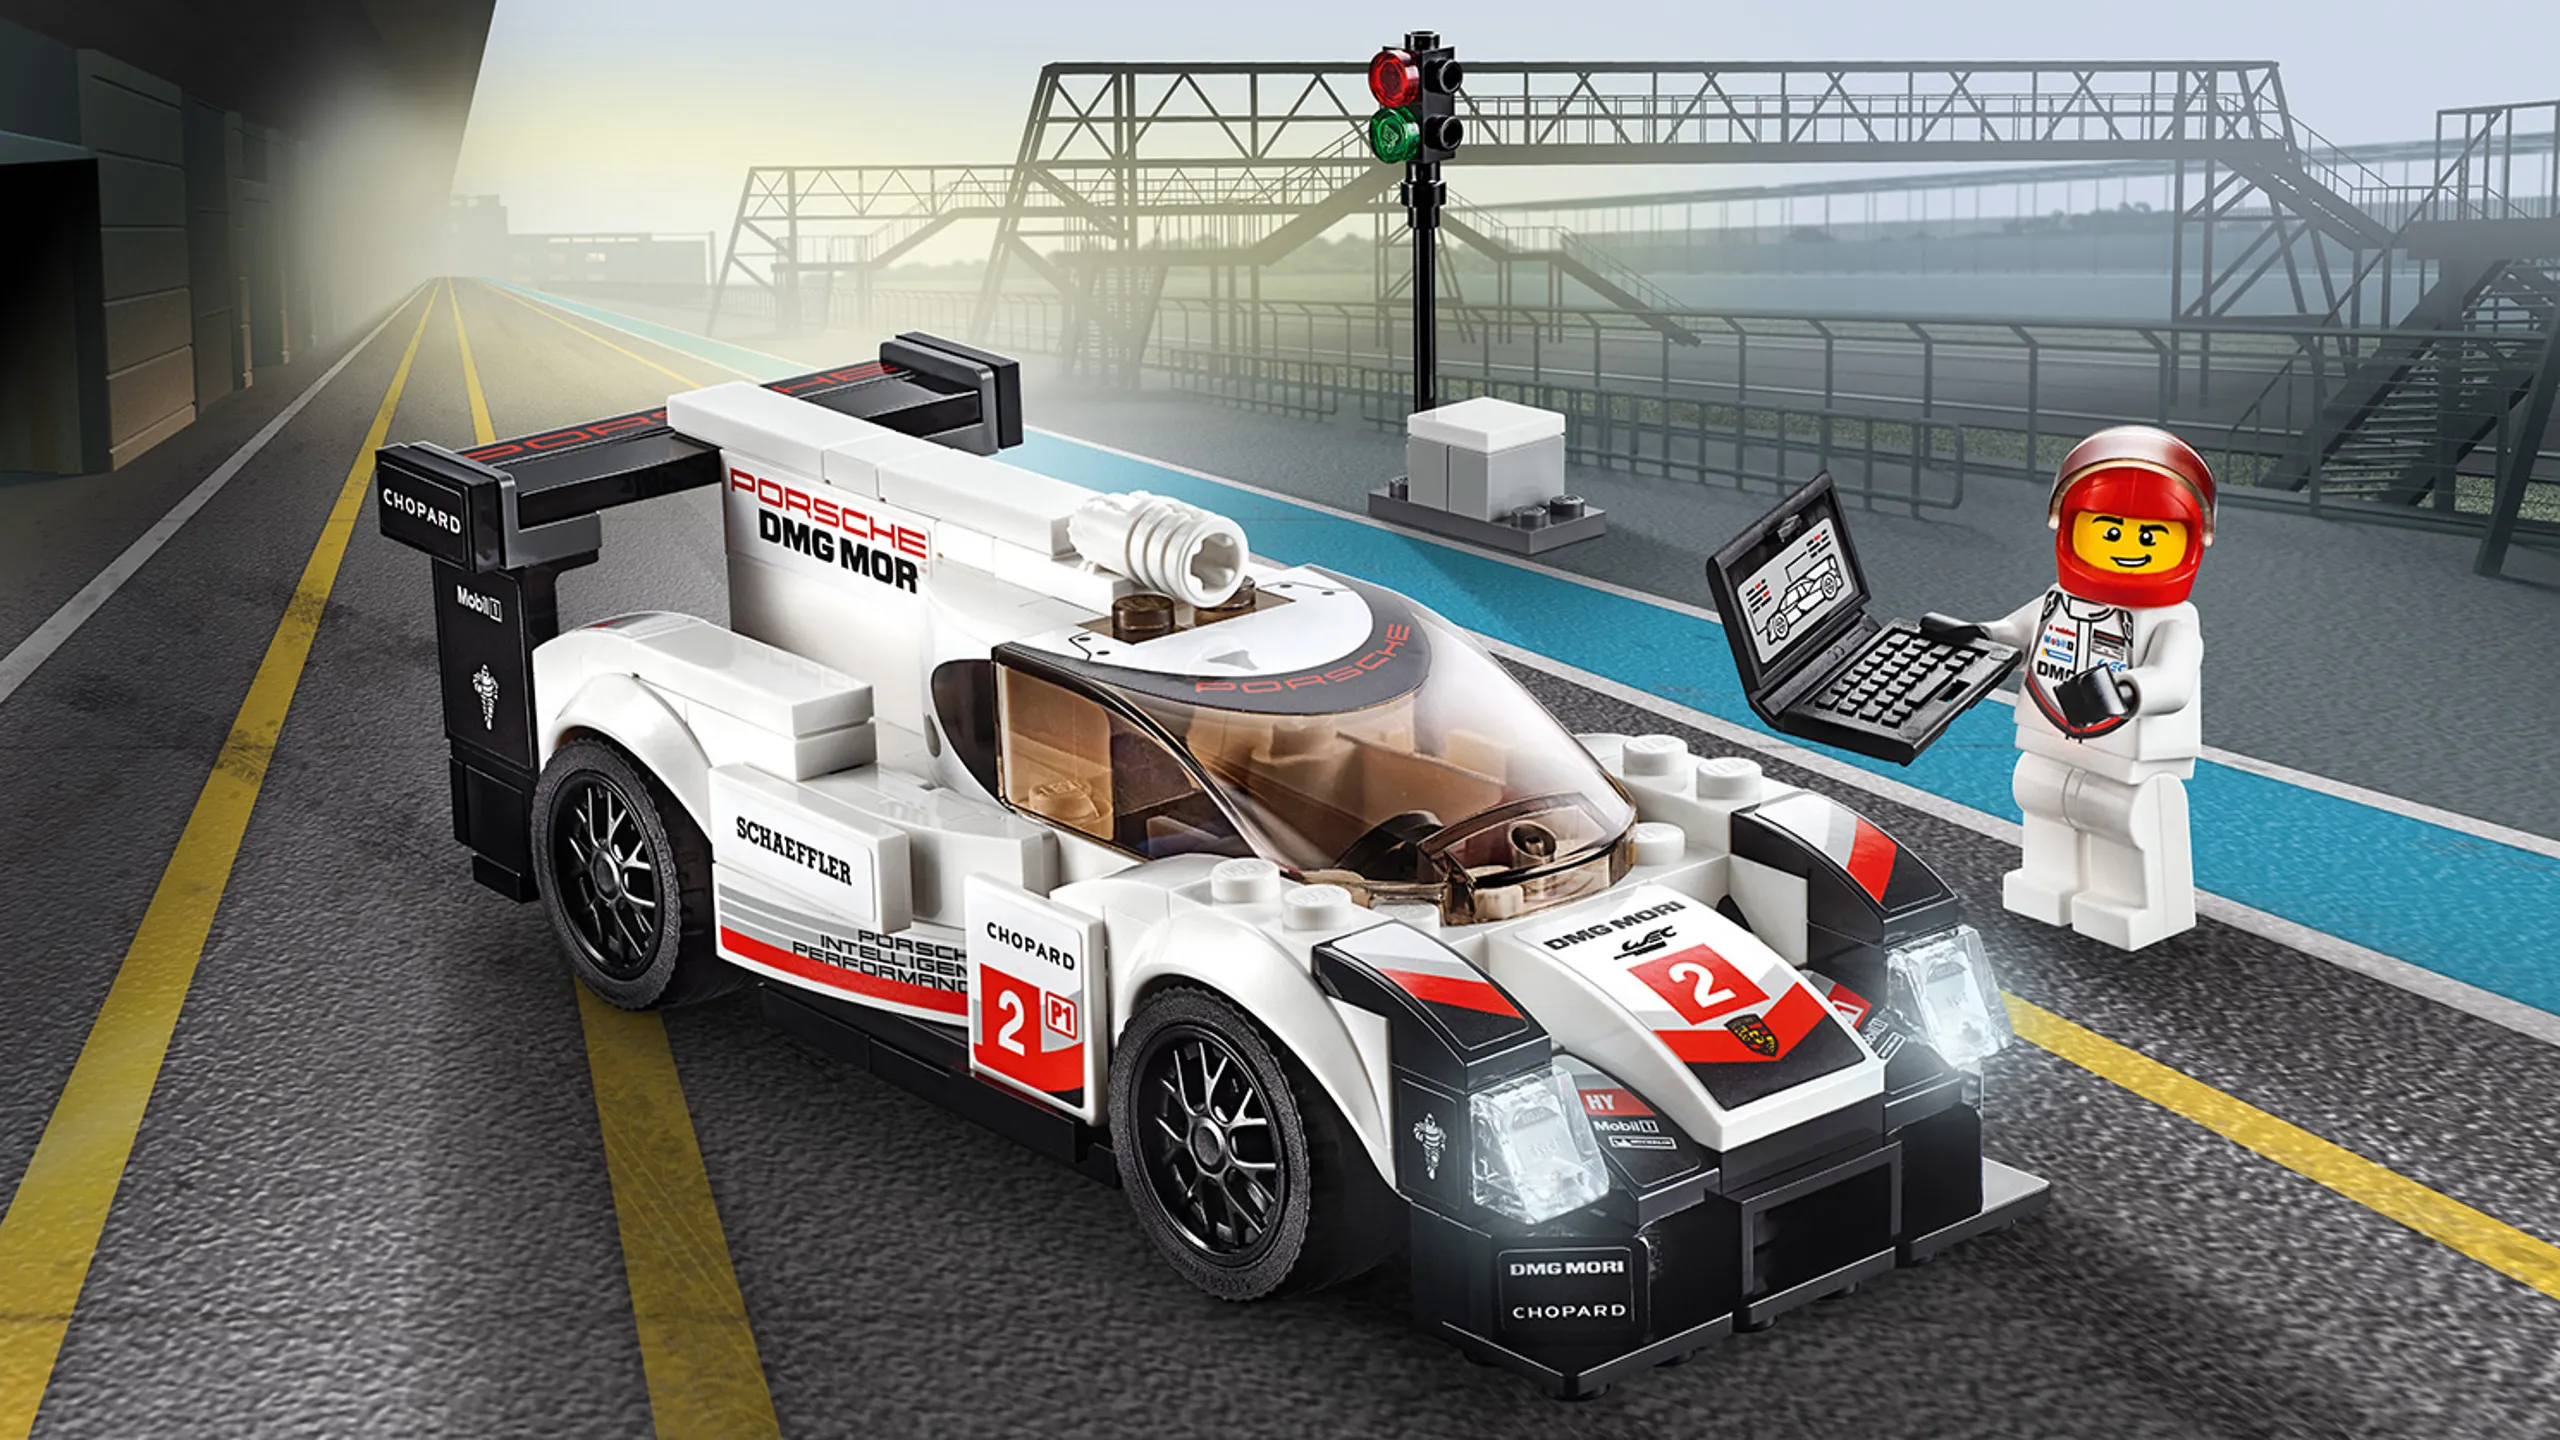 LEGO Speed Champions - 75887 Porsche 919 Hybrid - Power away from the start/finish post and check the car’s performance on the laptop and drive to victory!